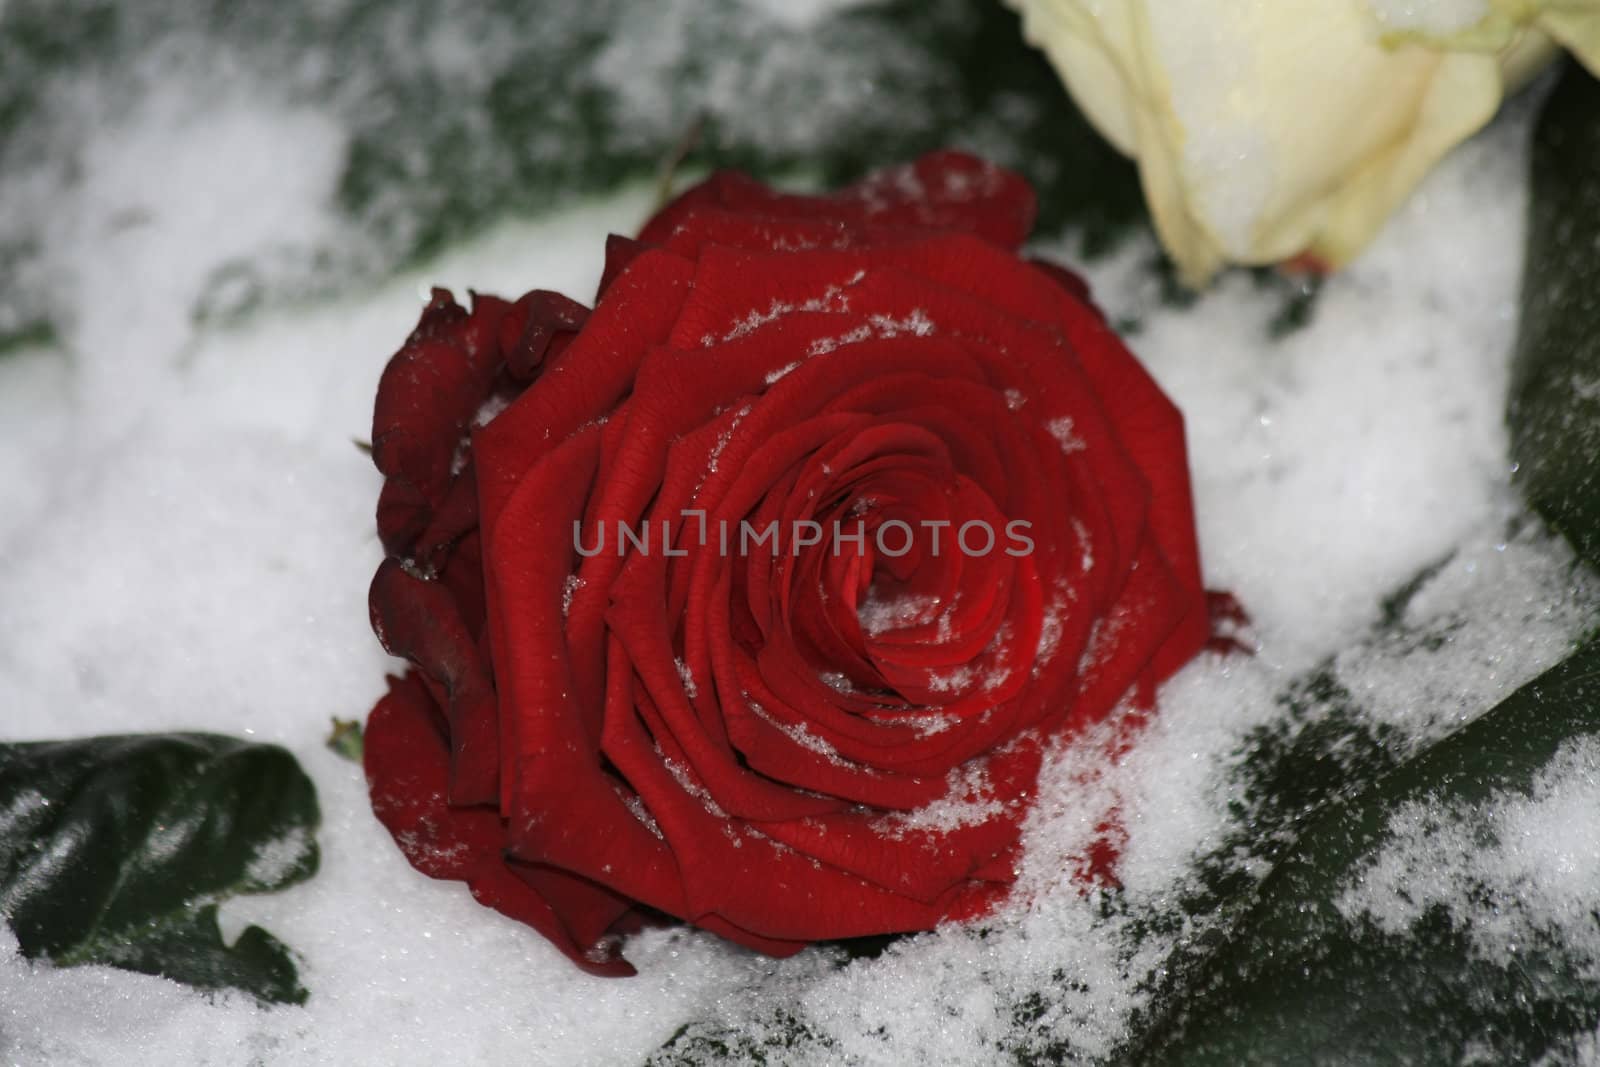 snowflakes on a red rose by studioportosabbia